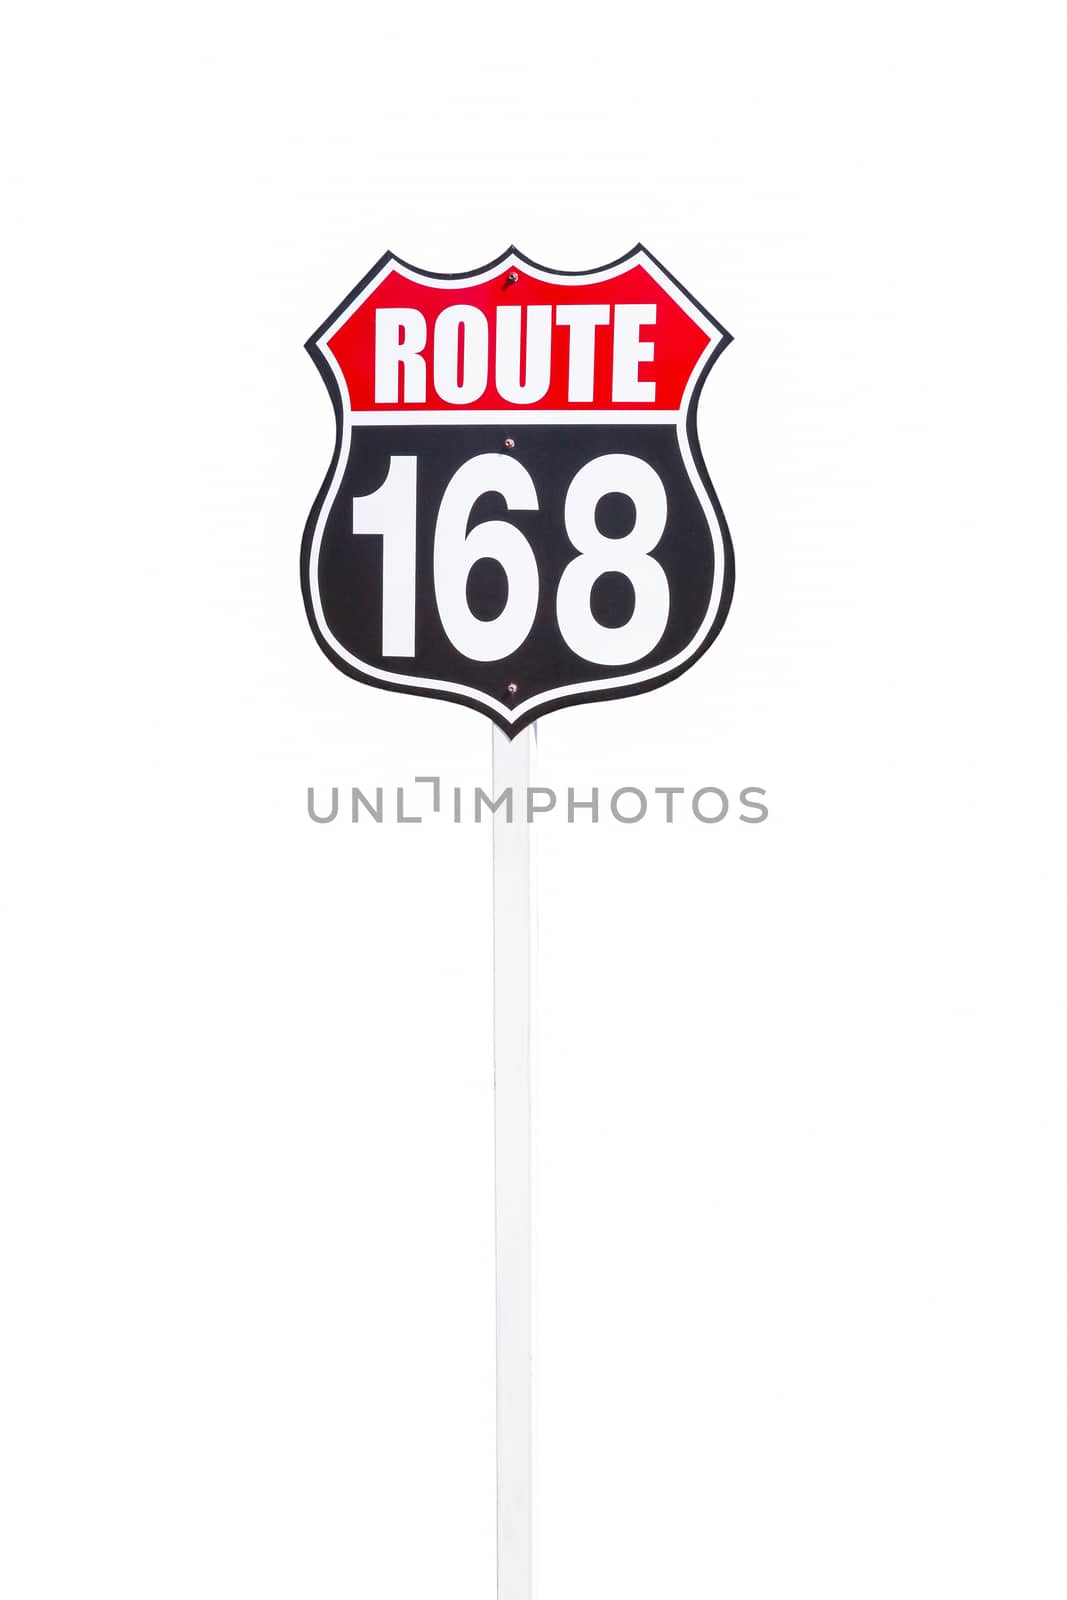 vintage route 168 road  sign isolated on white background by FrameAngel